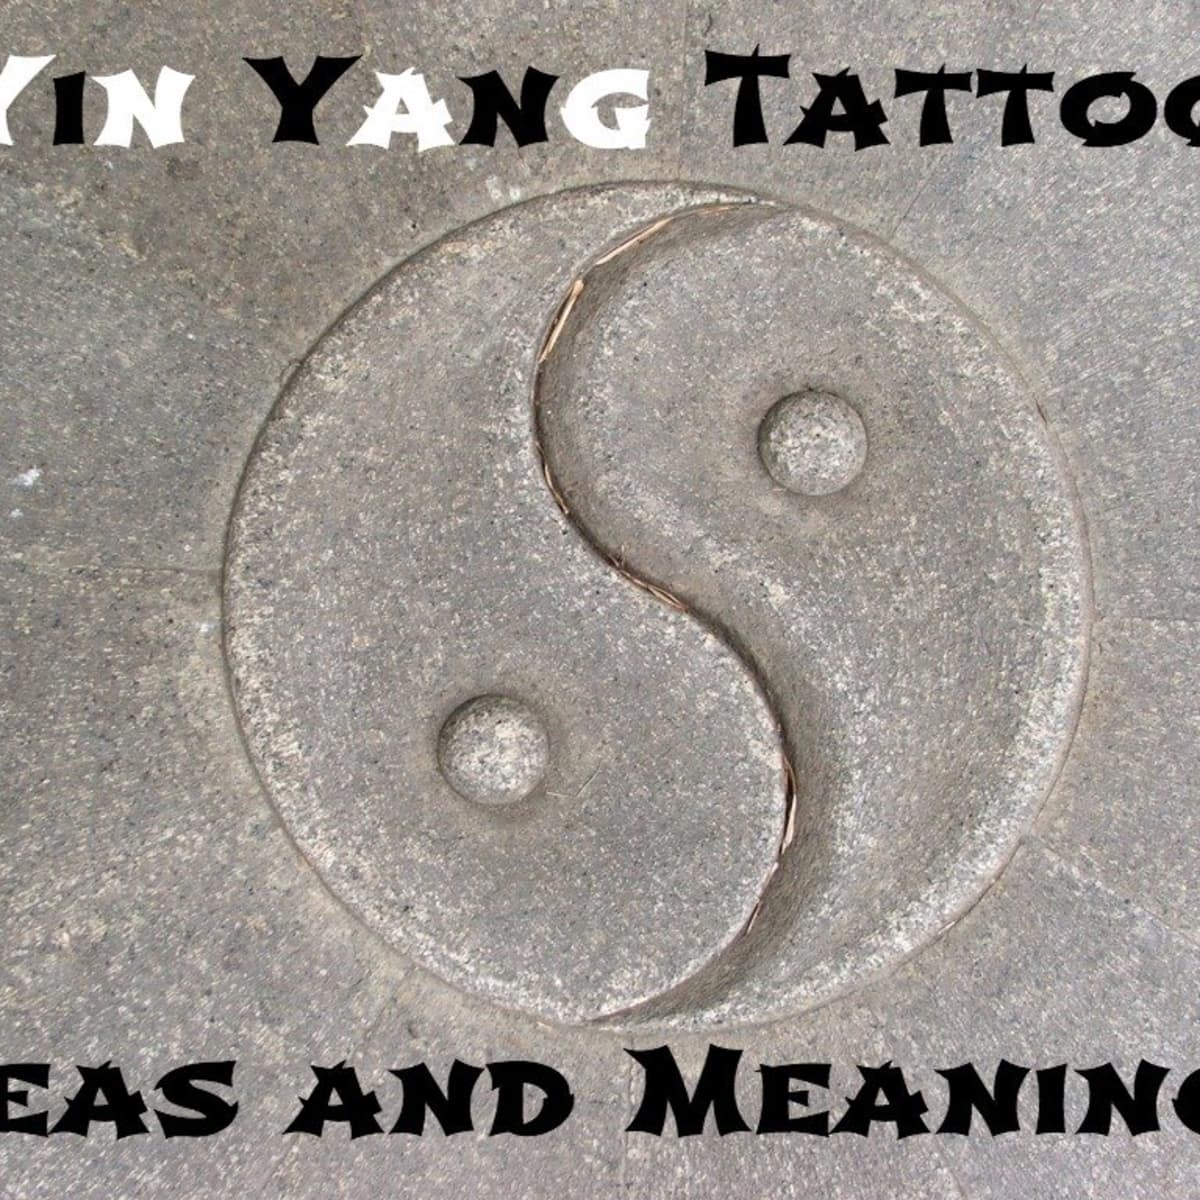 Yin Yang Tattoo Ideas, Designs, and Meaning - TatRing